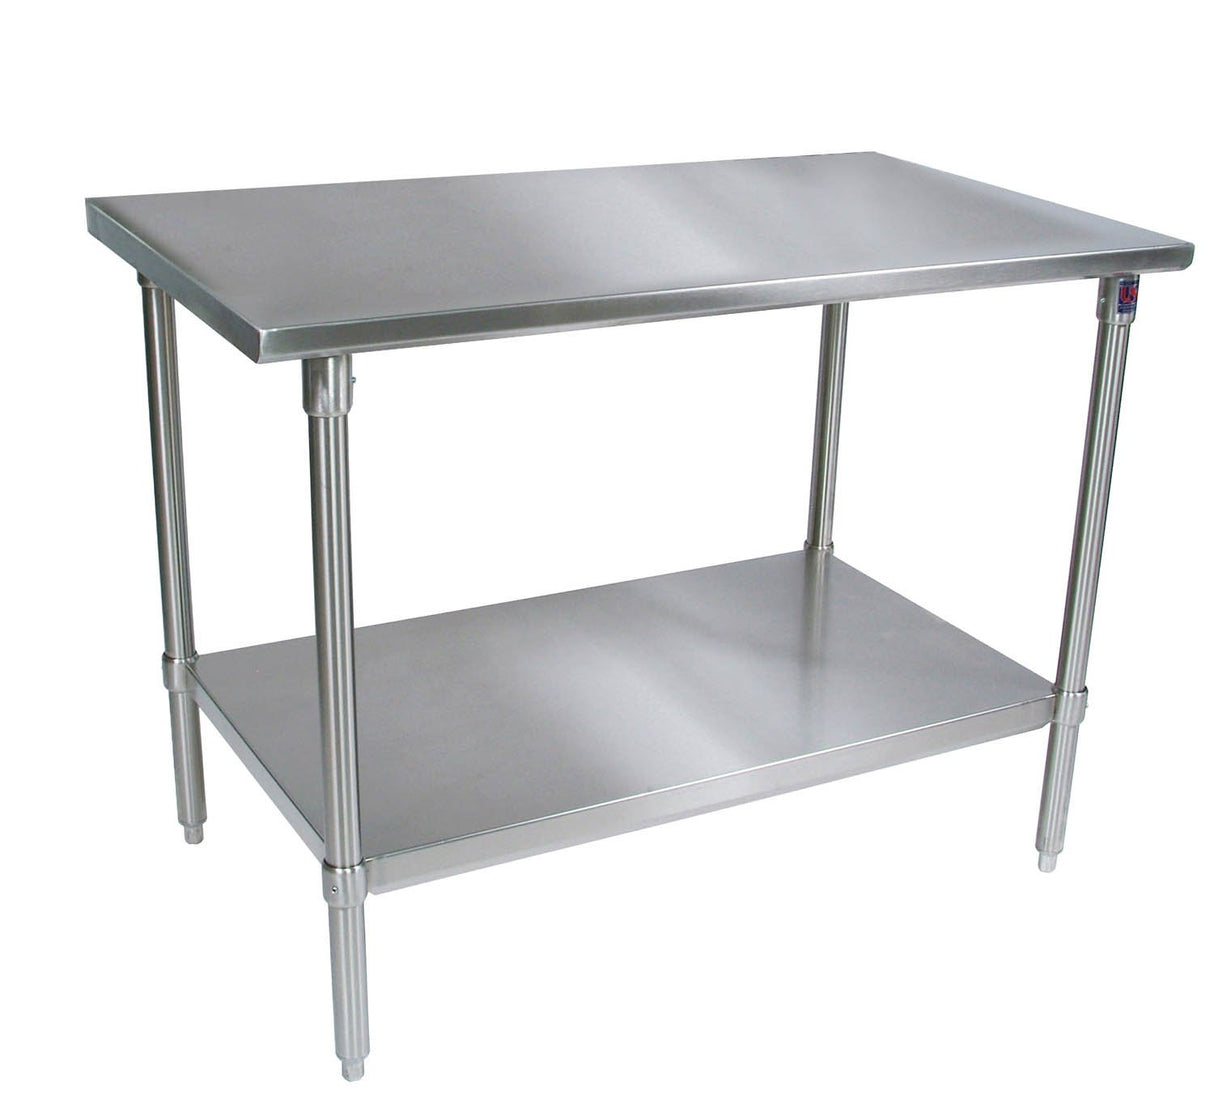 John Boos ST6-3636GSK 16 Gauge Stainless Steel Work Table, Flat Top, Galvanized Base and Shelf, 36" x